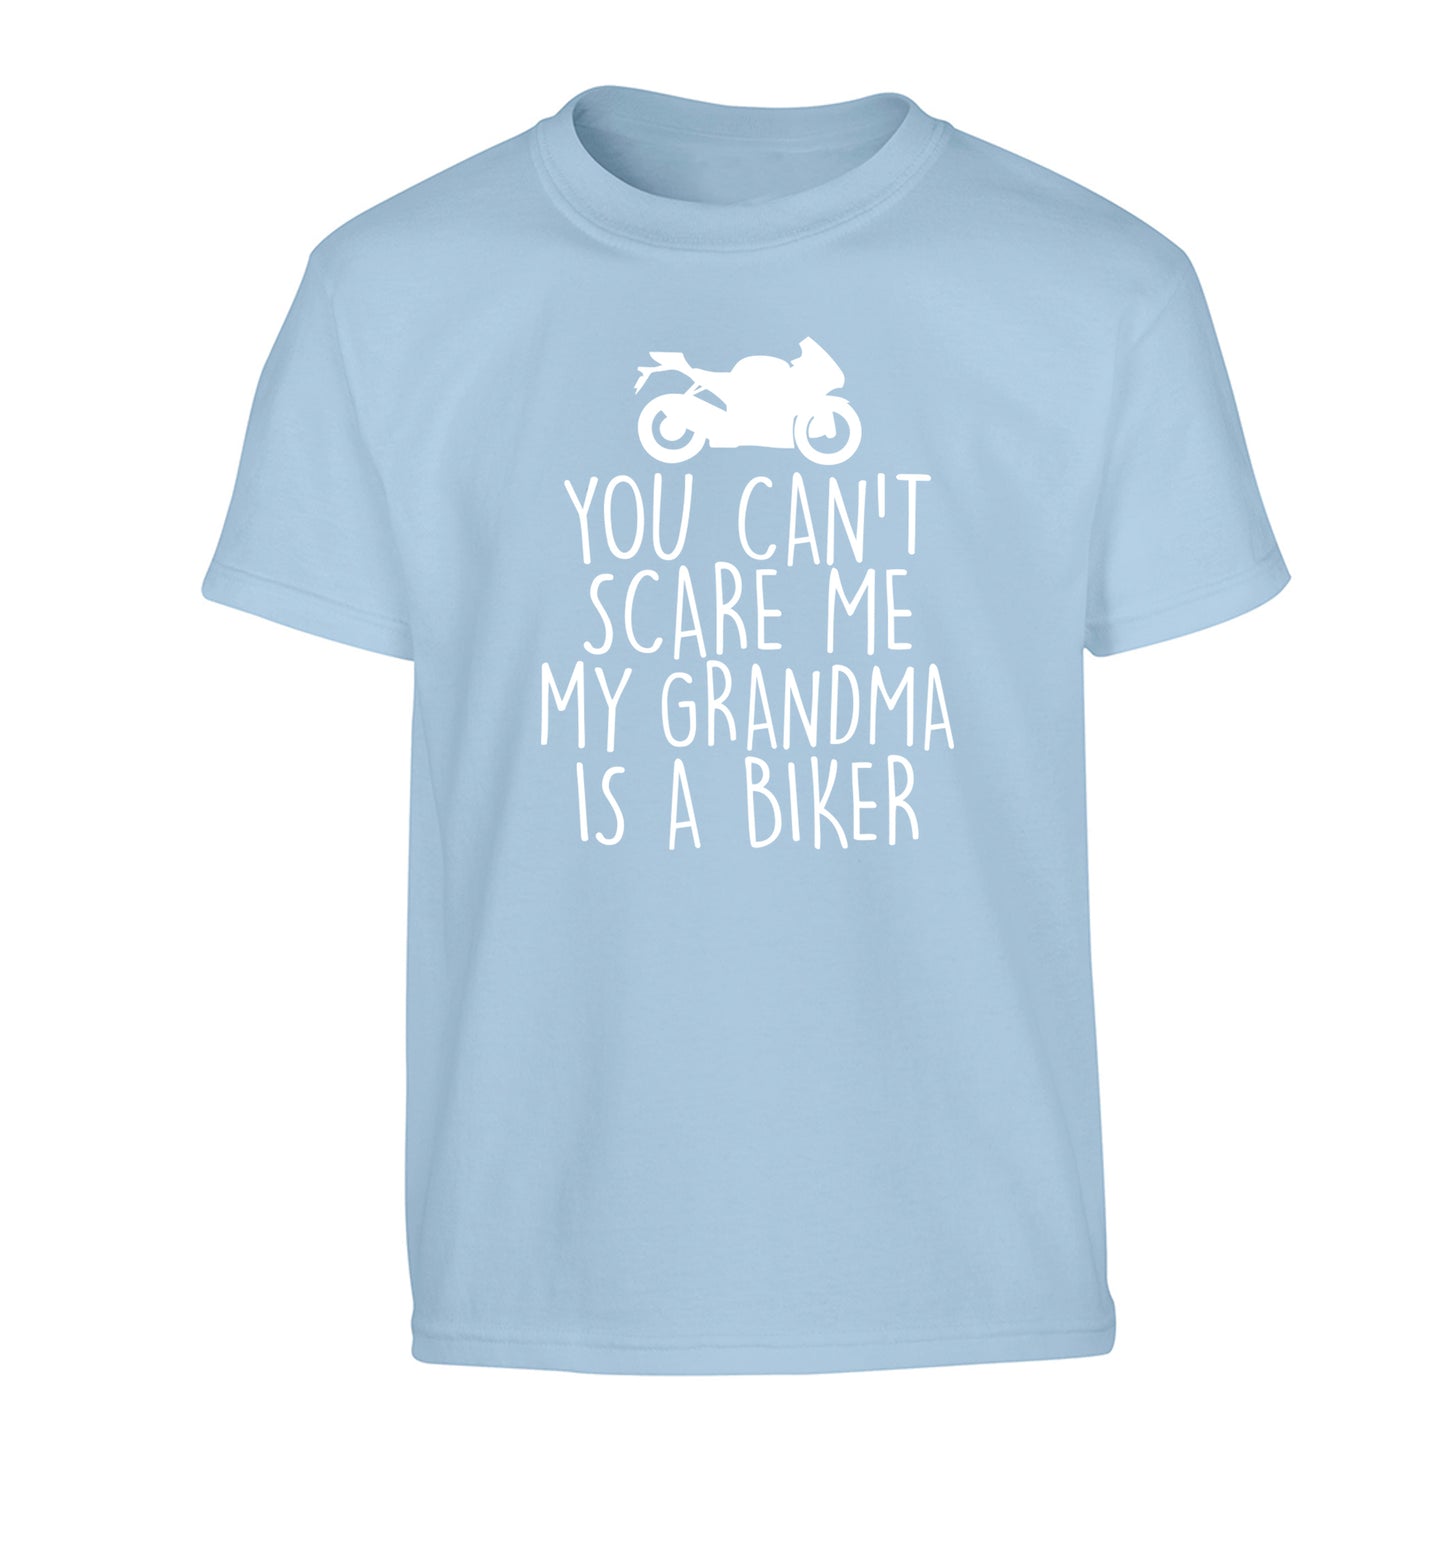 You can't scare me my grandma is a biker Children's light blue Tshirt 12-13 Years